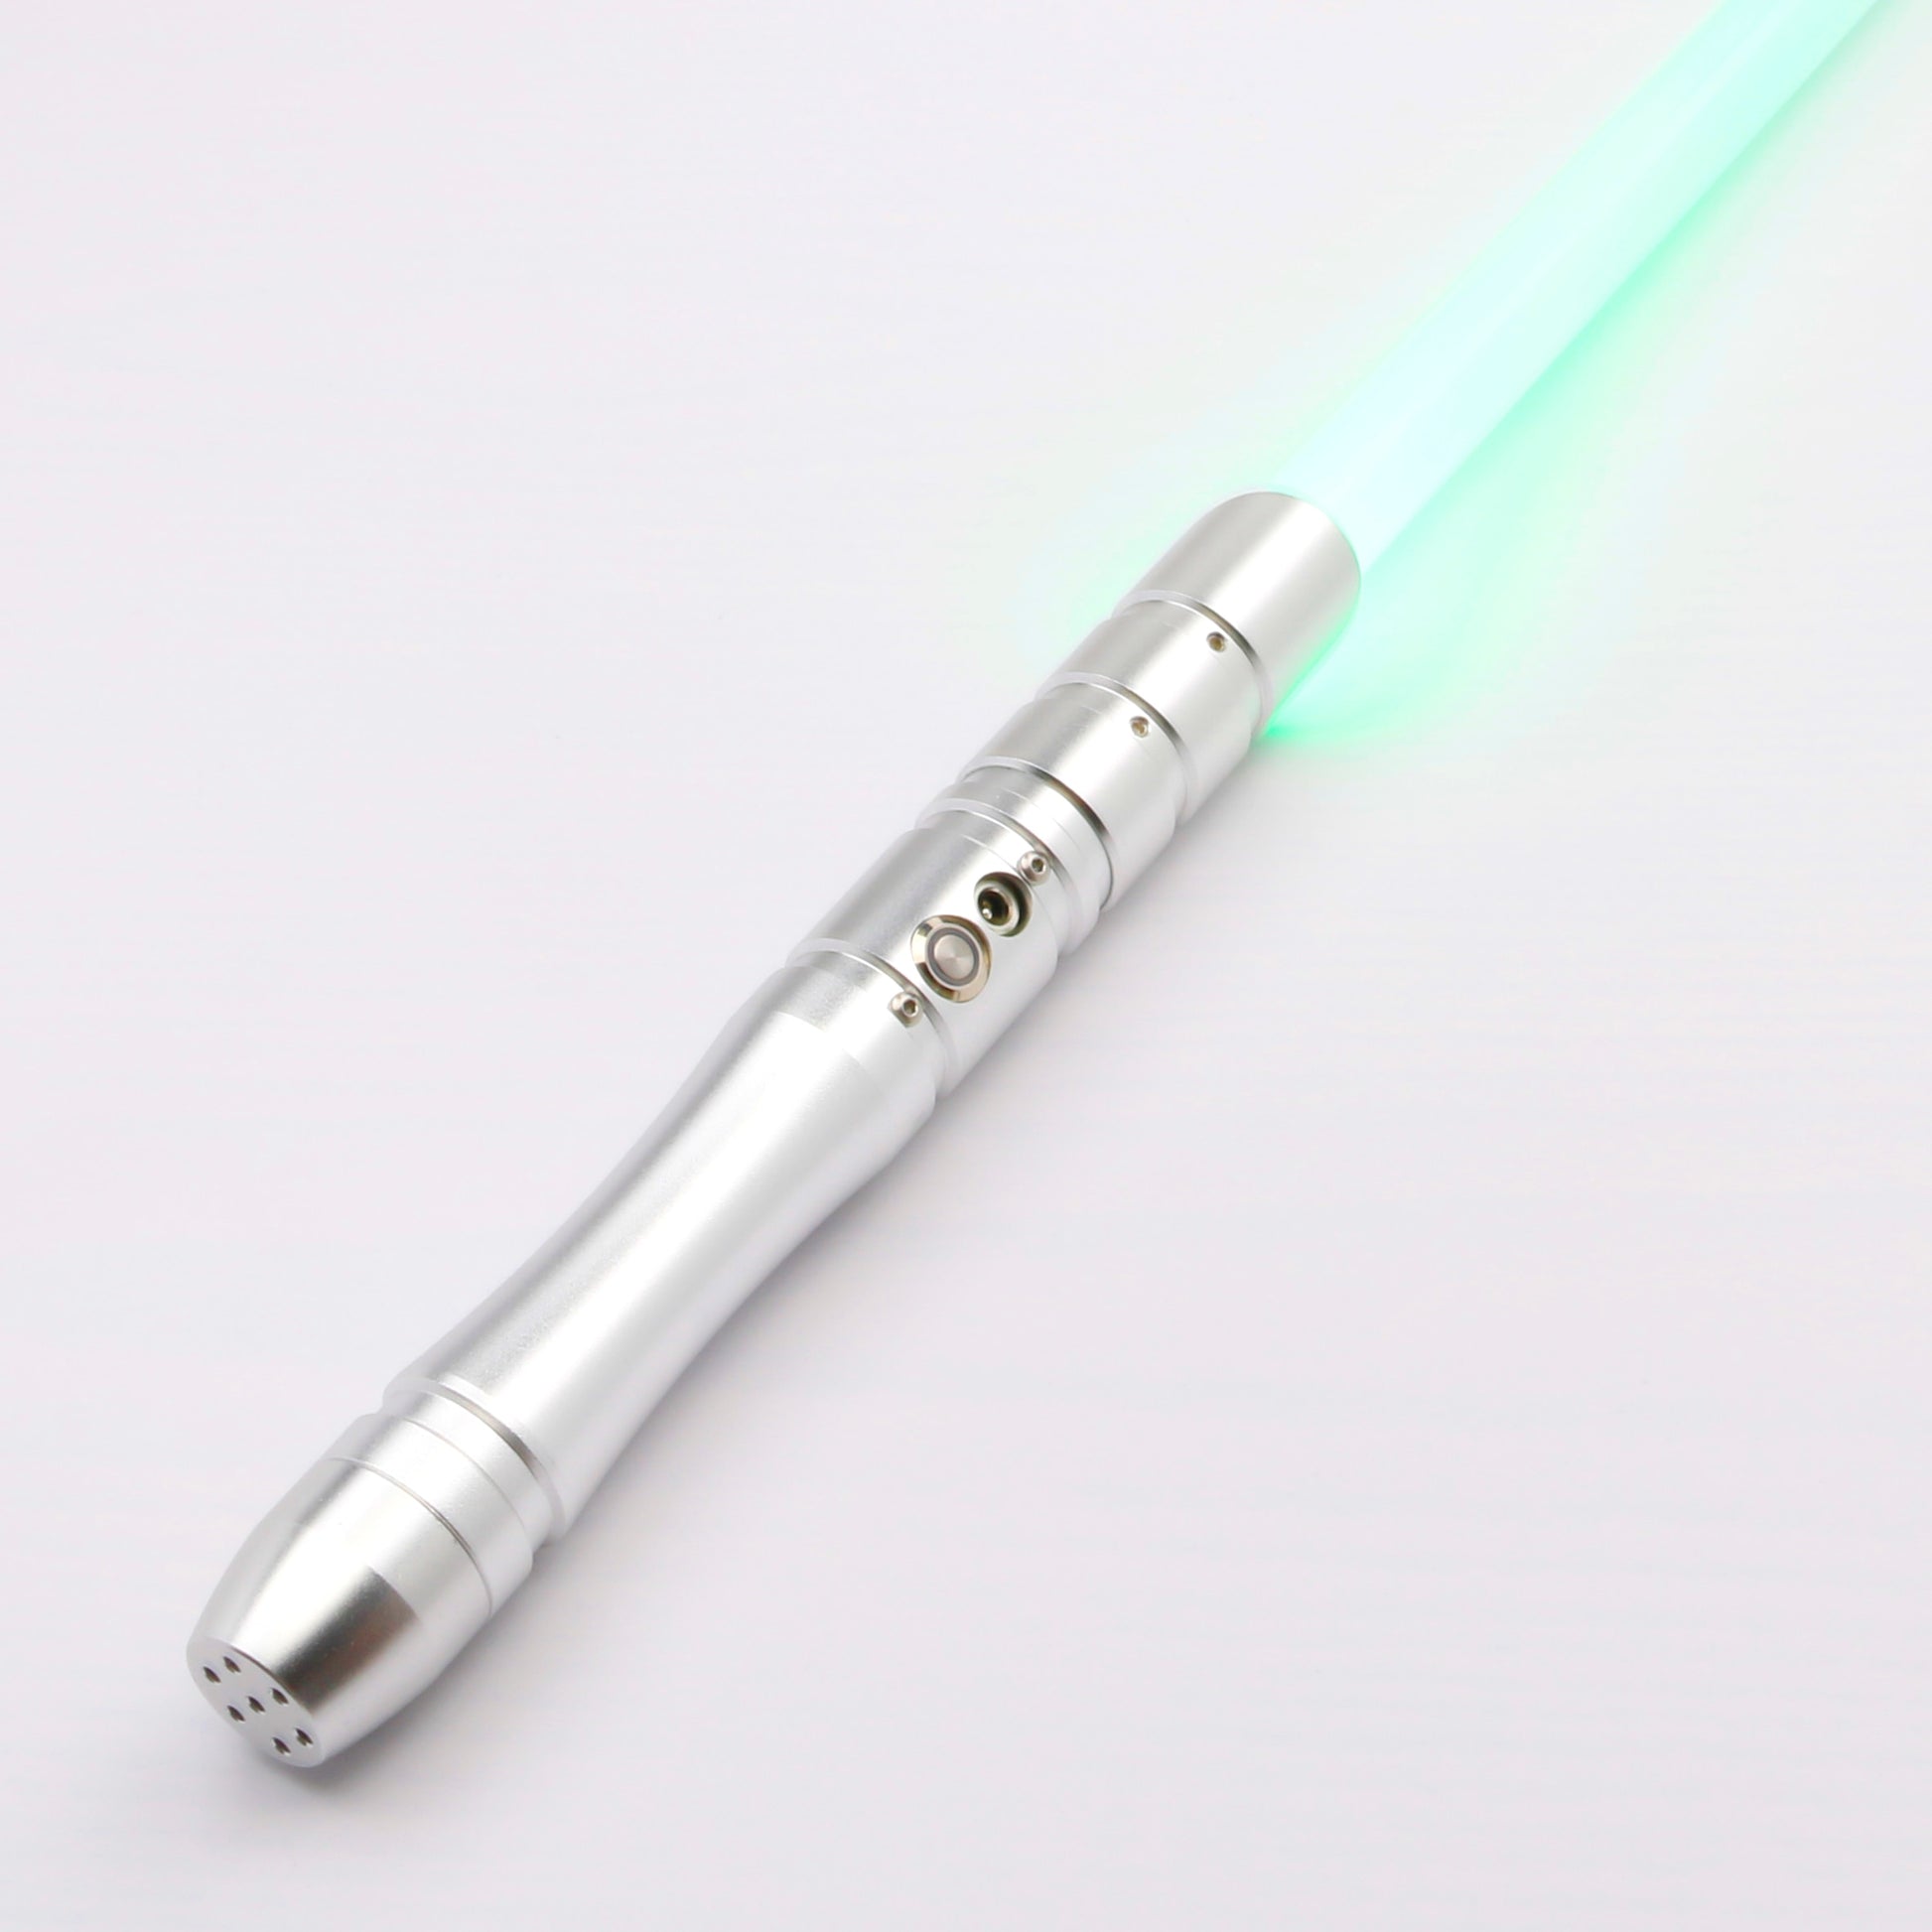 TXQSABER Smooth Lightsaber RGB Metal Hilt 12 Colors Force FX Saber For Heavy Dueling Double Connected Laser Sword Halloween Toys 0 DailyAlertDeals   